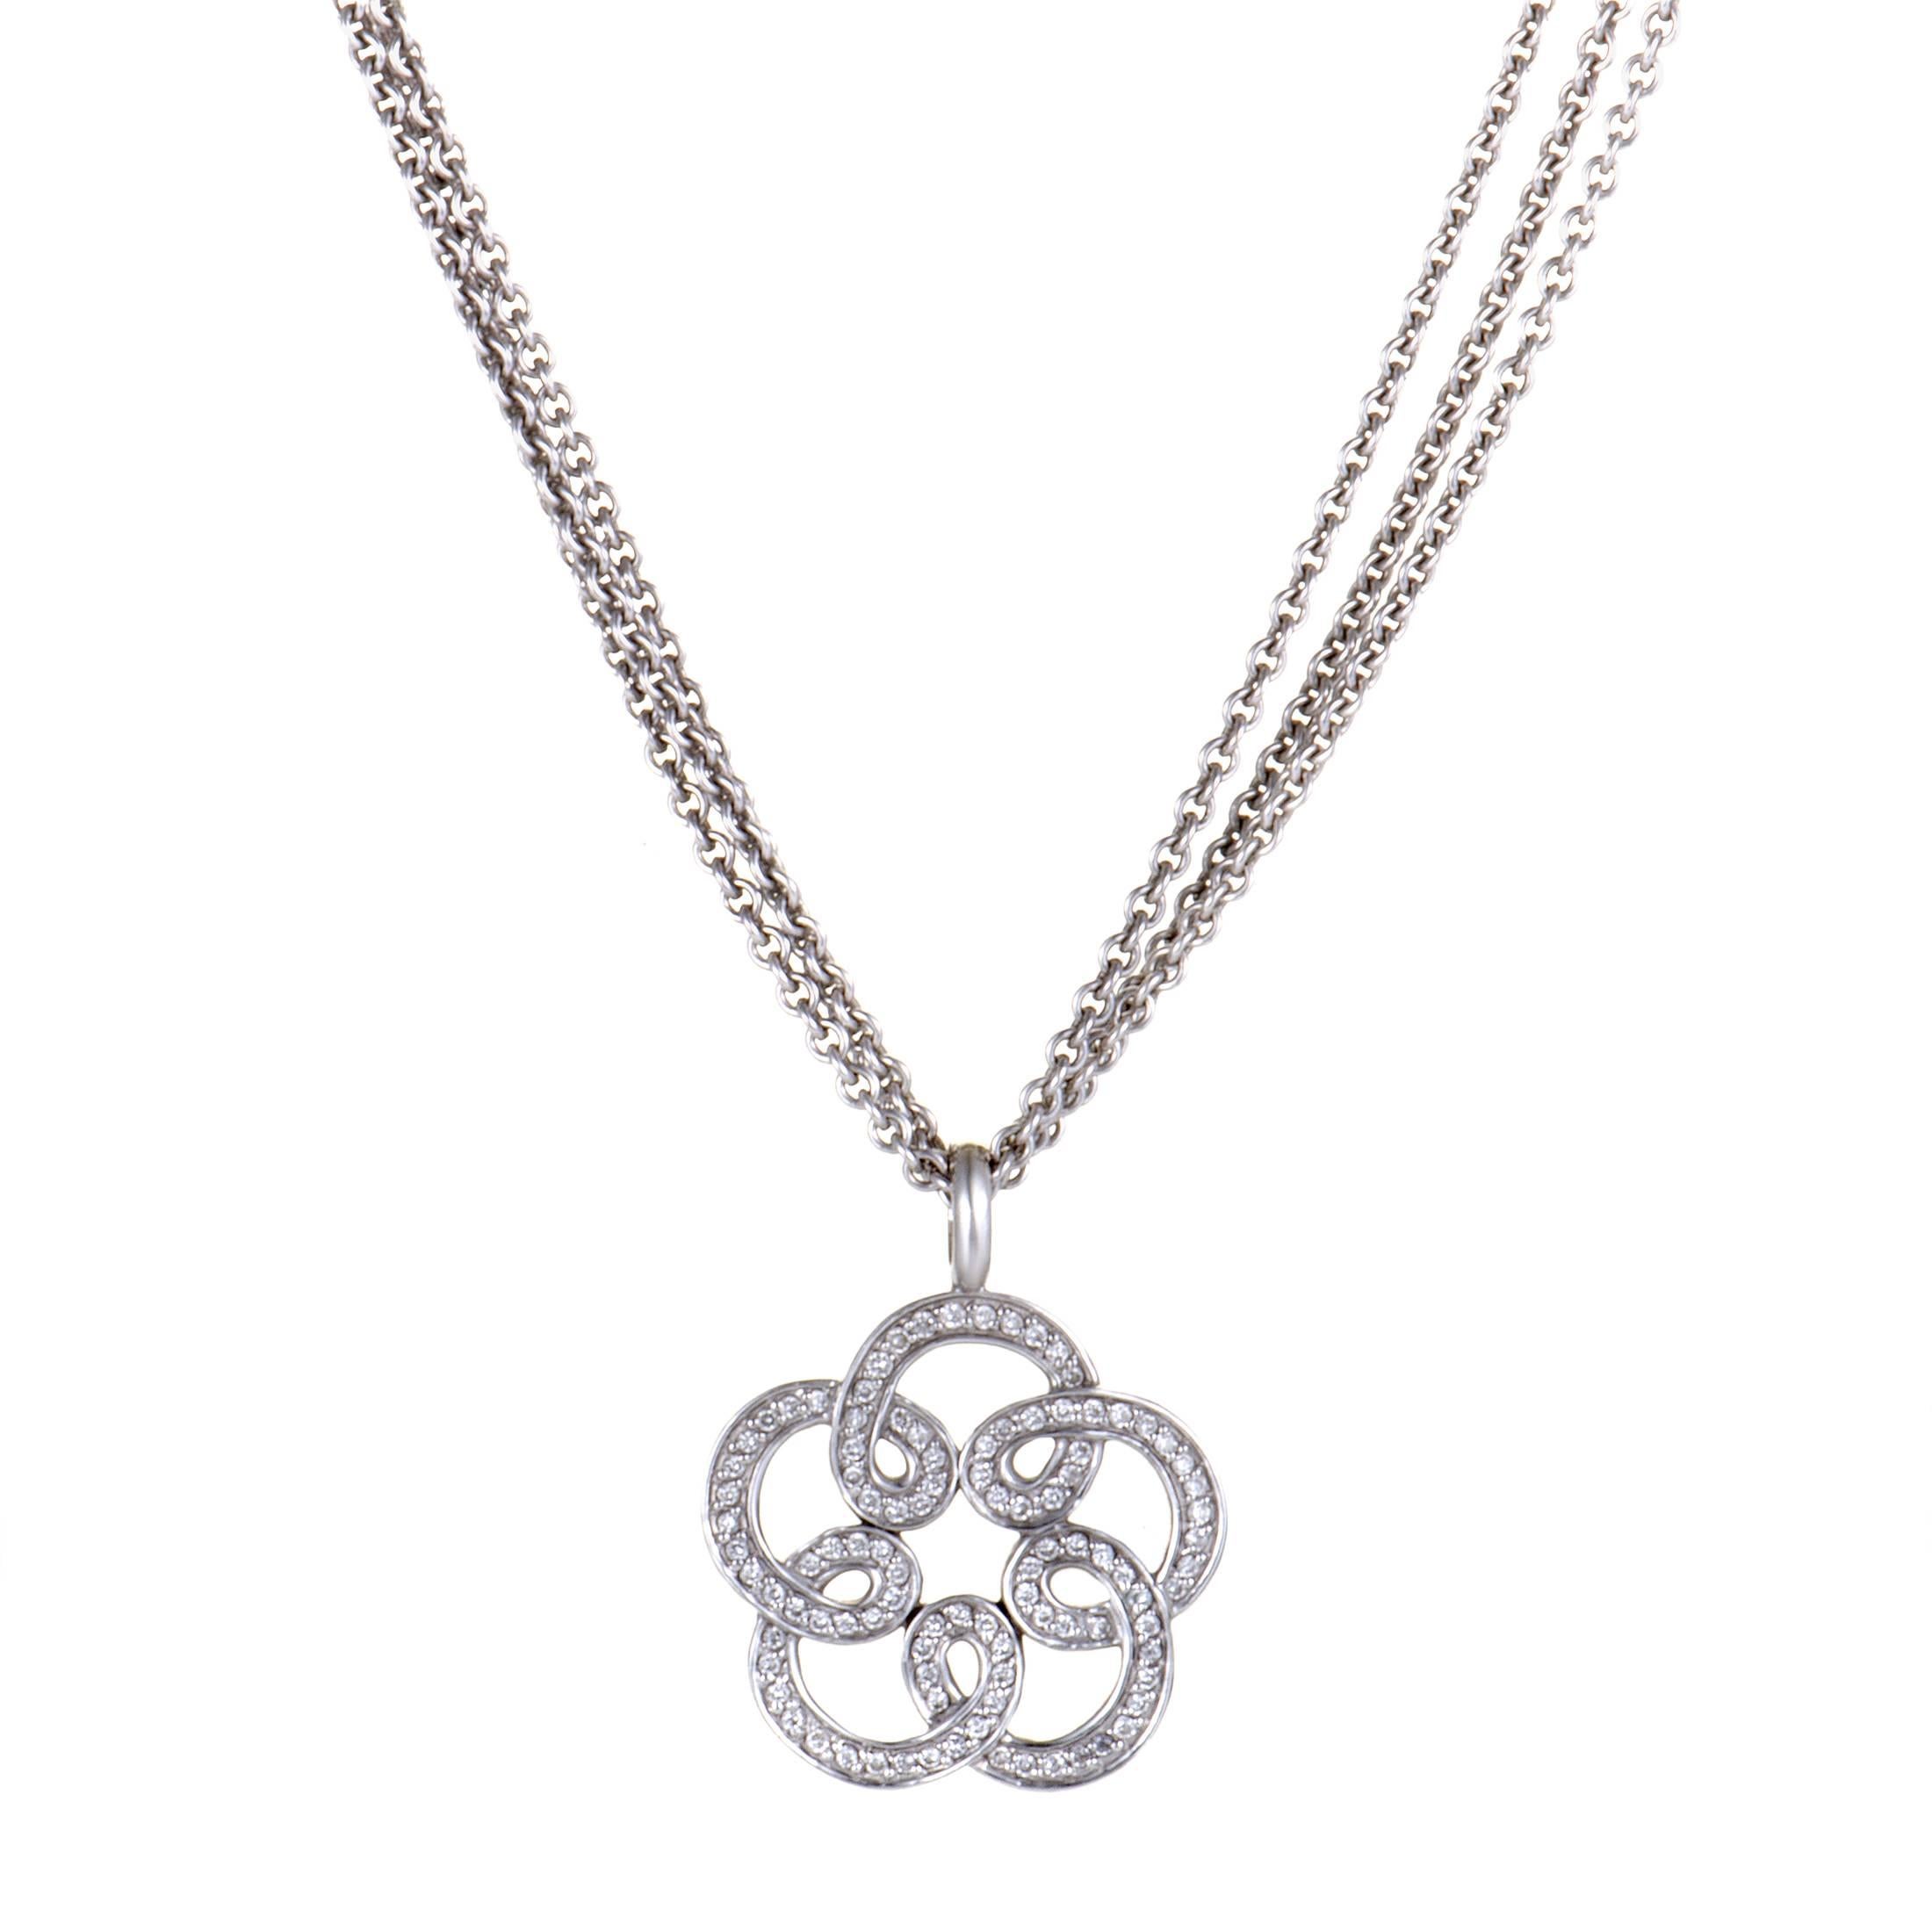 Made of 18K white gold and featuring graceful feminine design and tastefully subtle diamond décor, this Tous necklace boasts an exceptionally stylish appeal. The necklace weighs 22.3 grams and boasts a total of 0.85 carats of diamonds.
Pendant